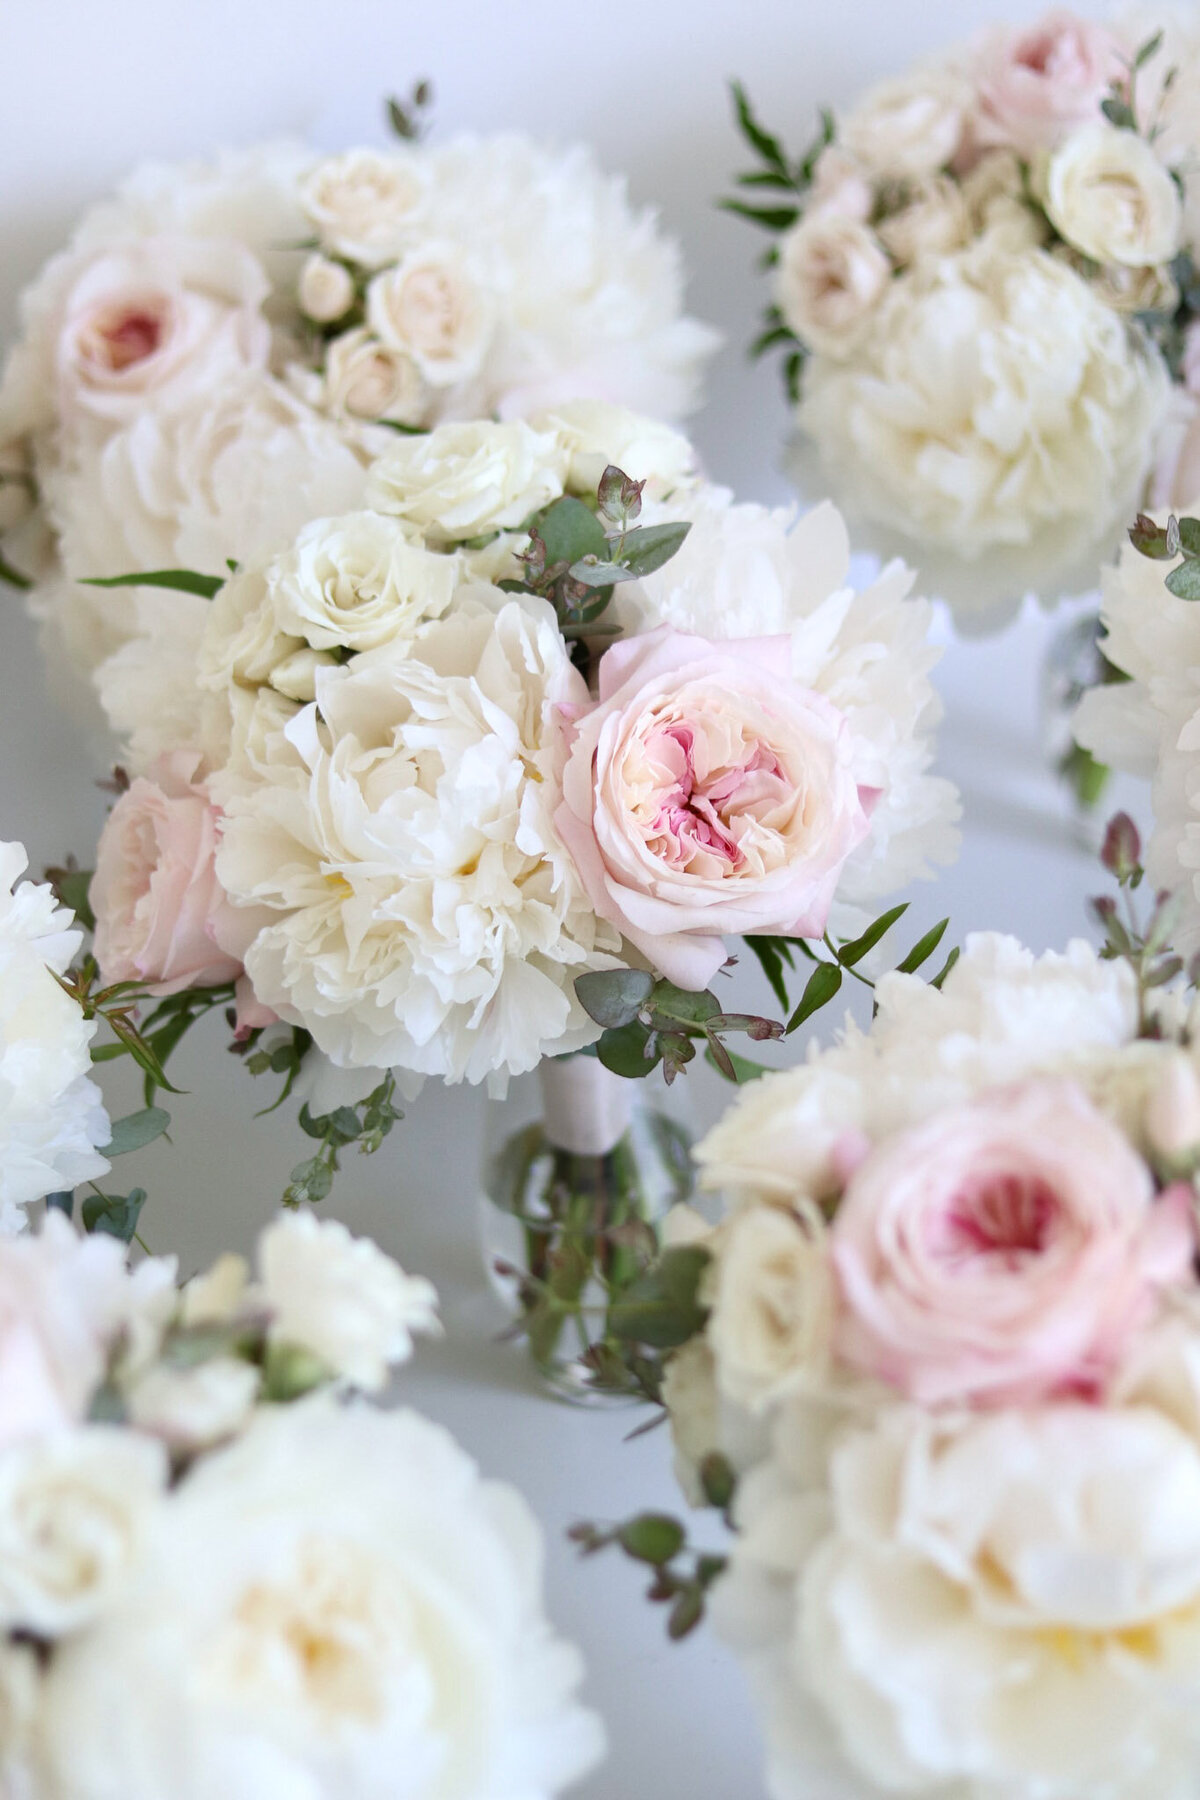 Blush and white peonies and garden roses bridesmaid bouquets for a wedding.